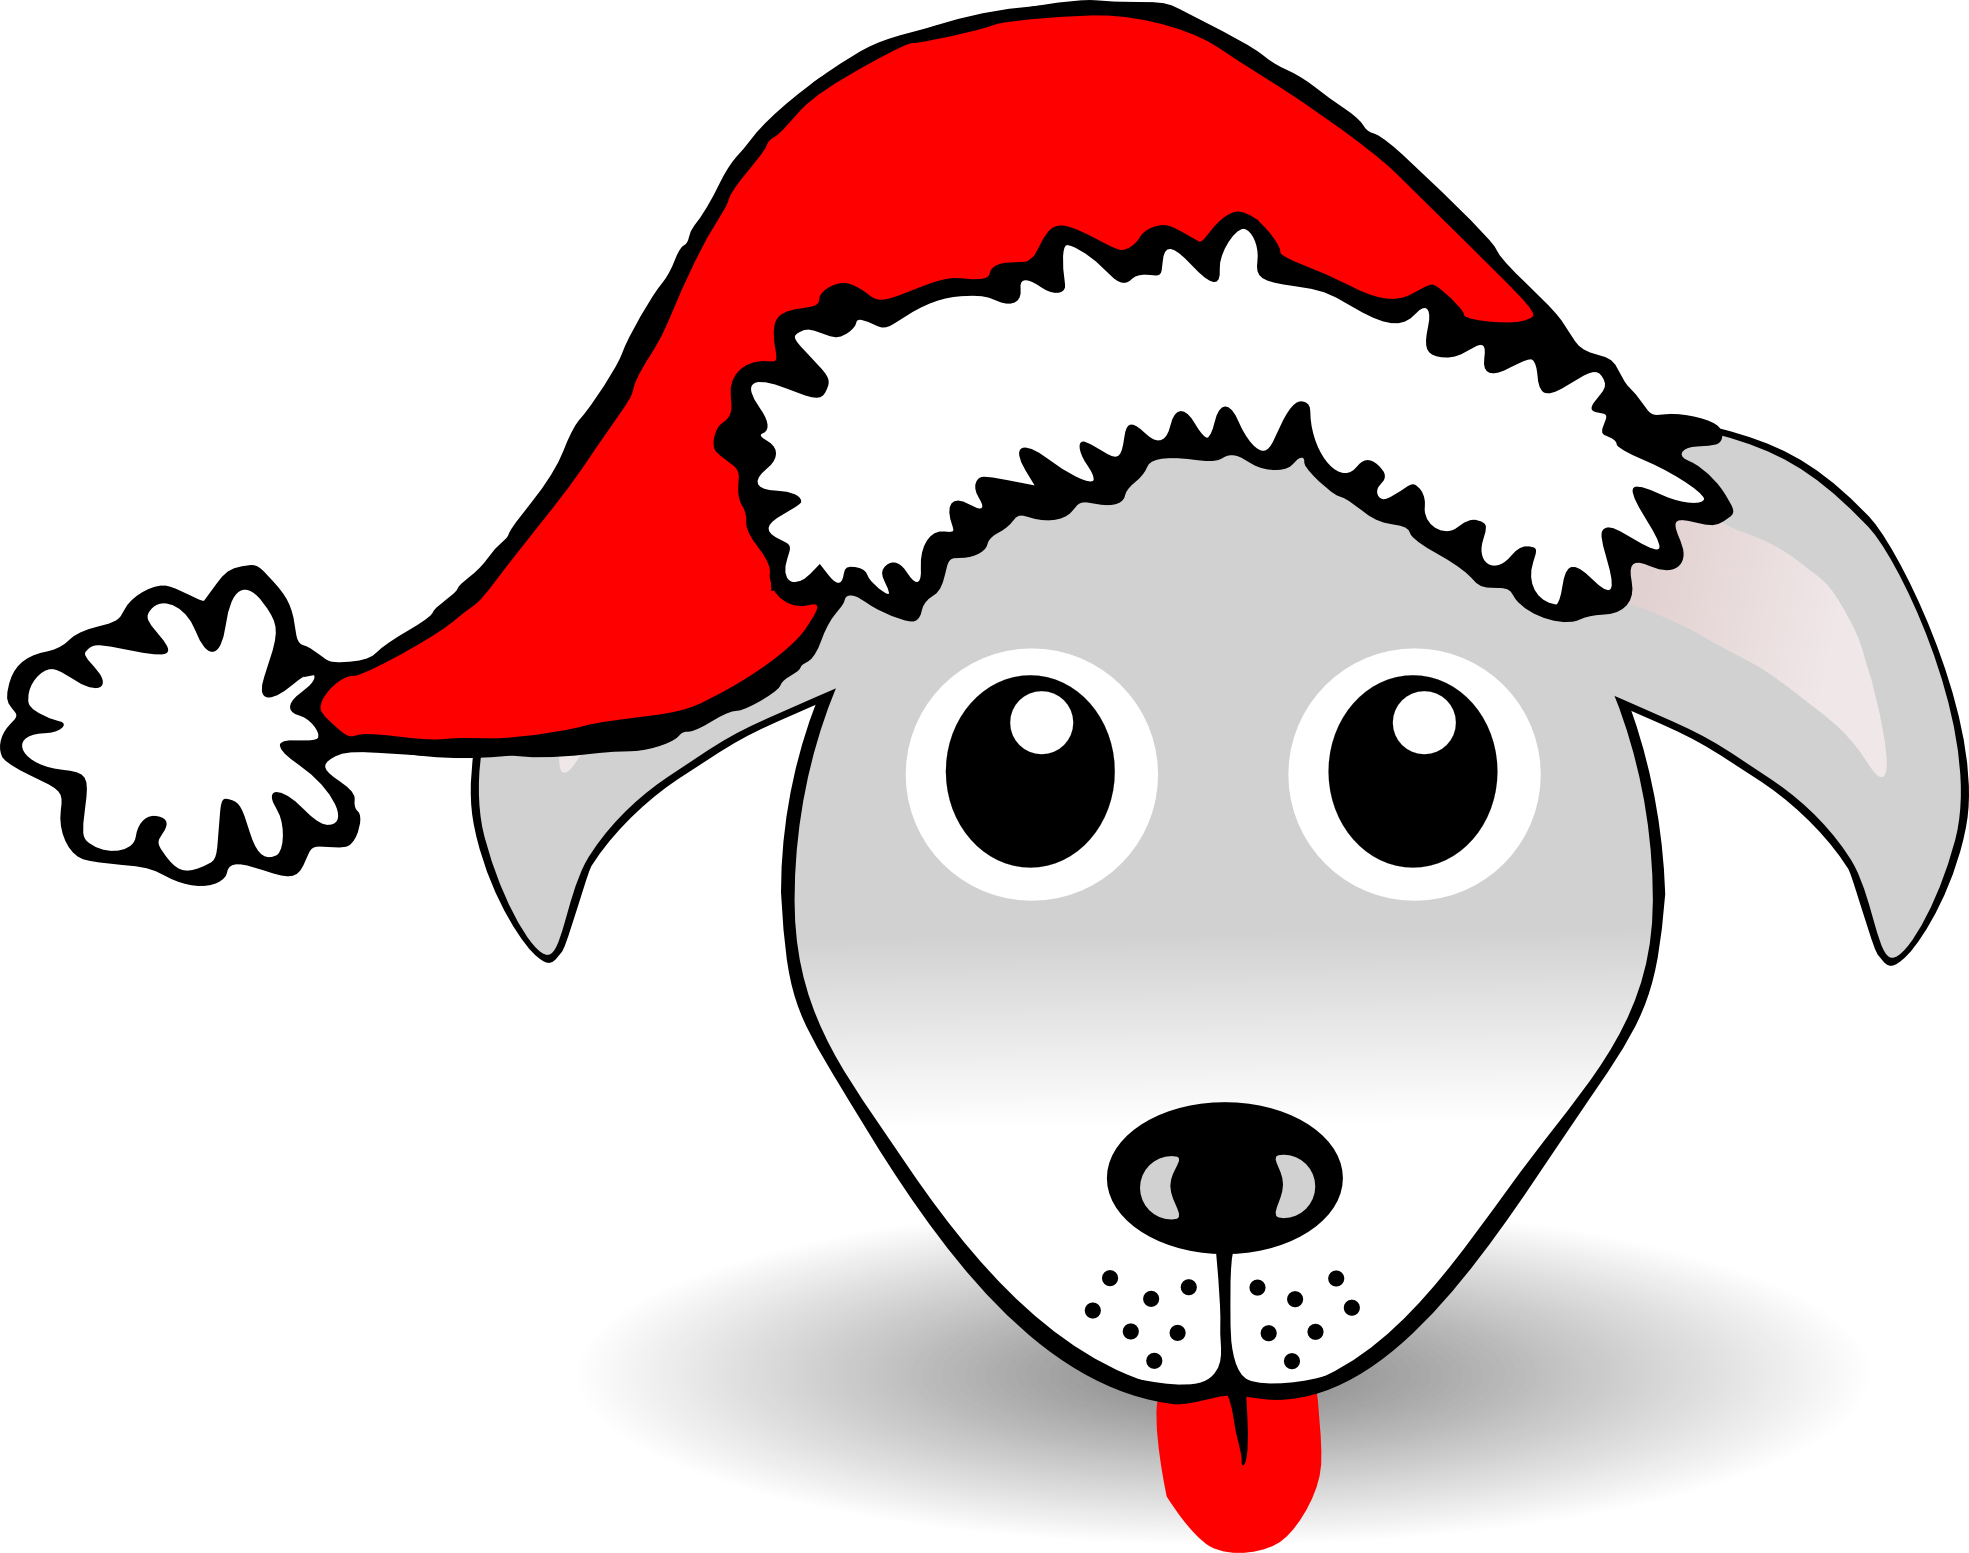 Dog christmas hat clipart